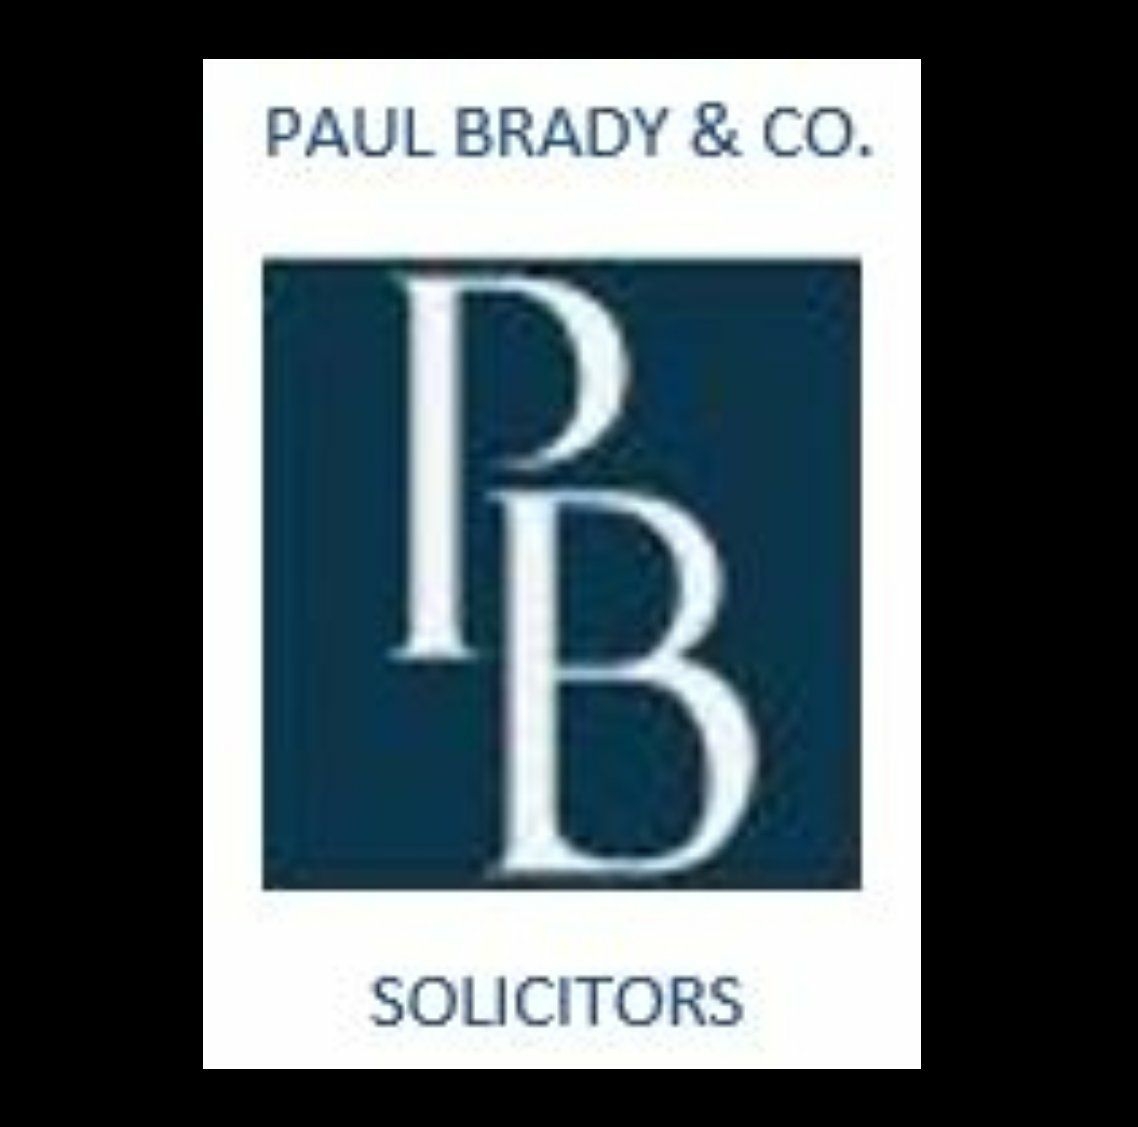 Paul Brady & Co. Solicitors